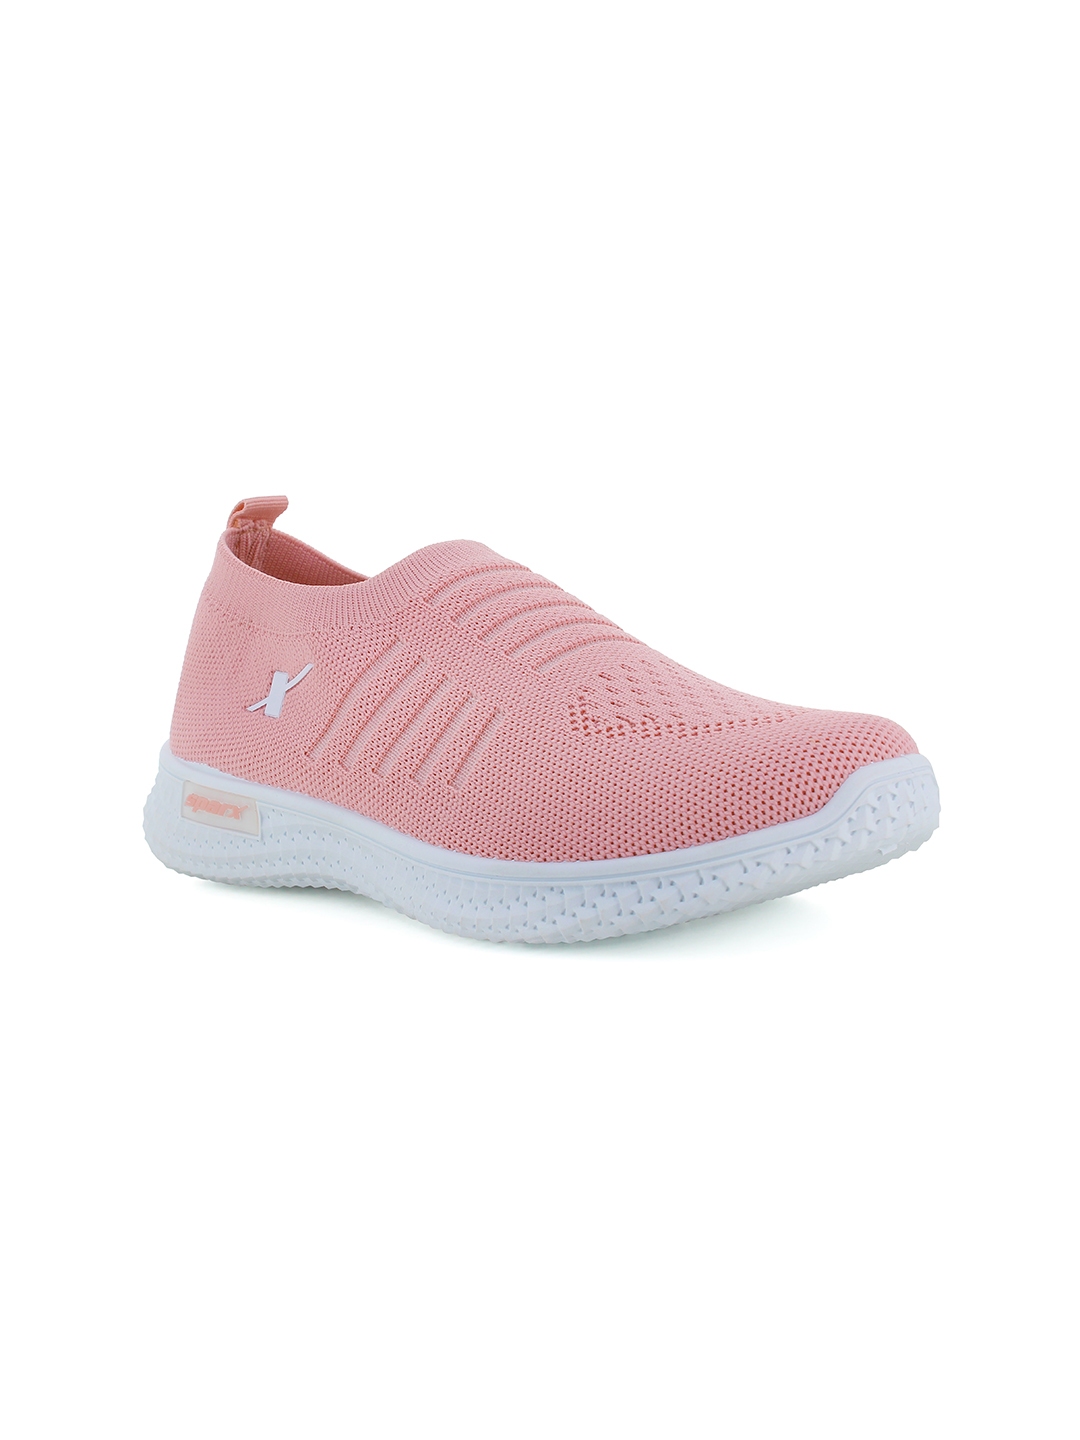 Buy Sparx Women Pink & White Mesh Running Shoes - Sports Shoes for ...